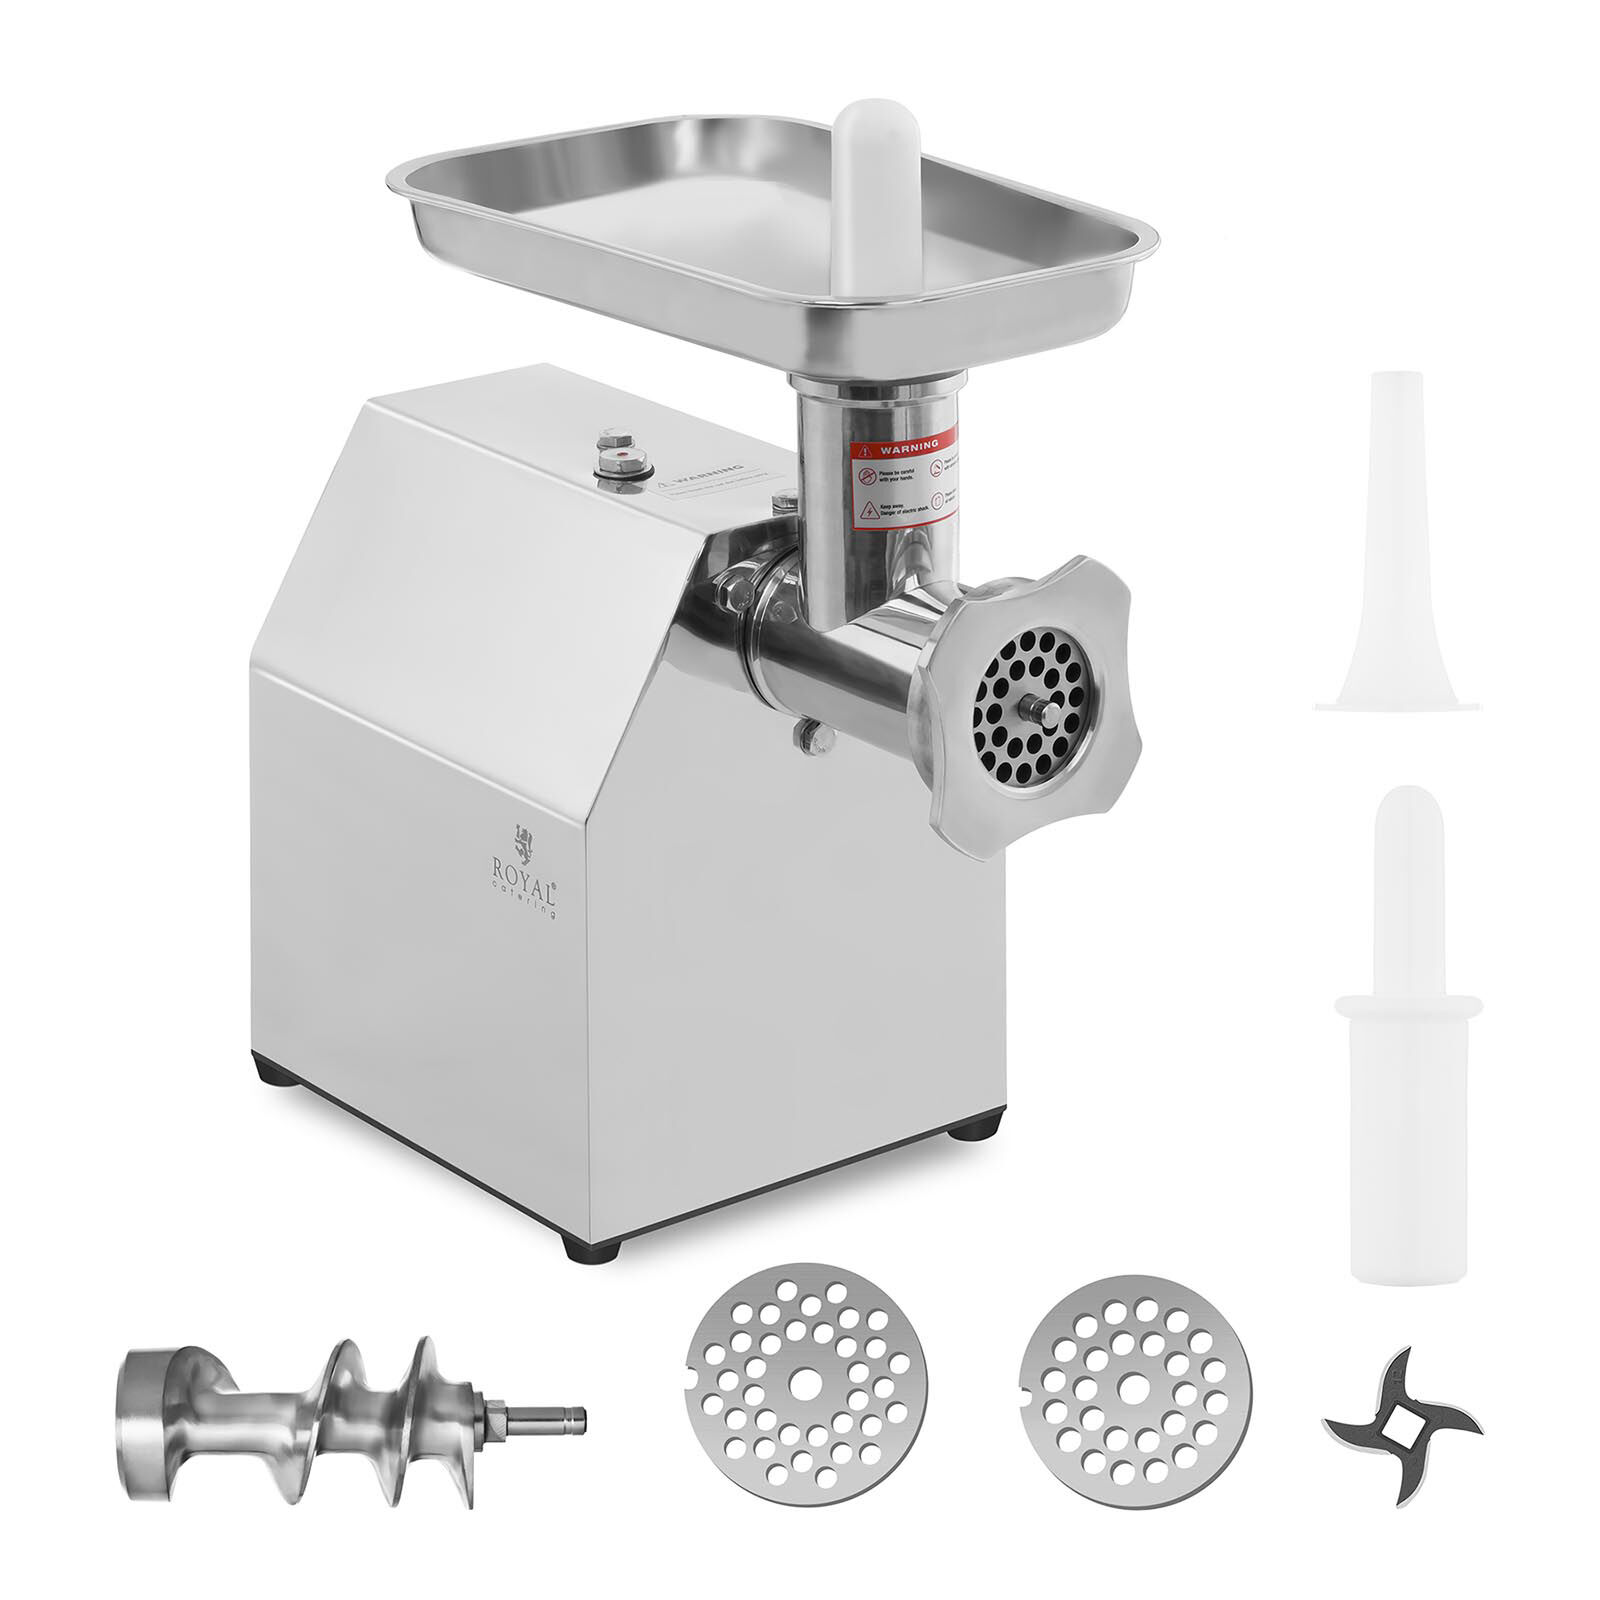 Royal Catering Stainless Steel Meat Mincer - Return Flow - 140 kg/h - ECO RCFW 140-850ECO